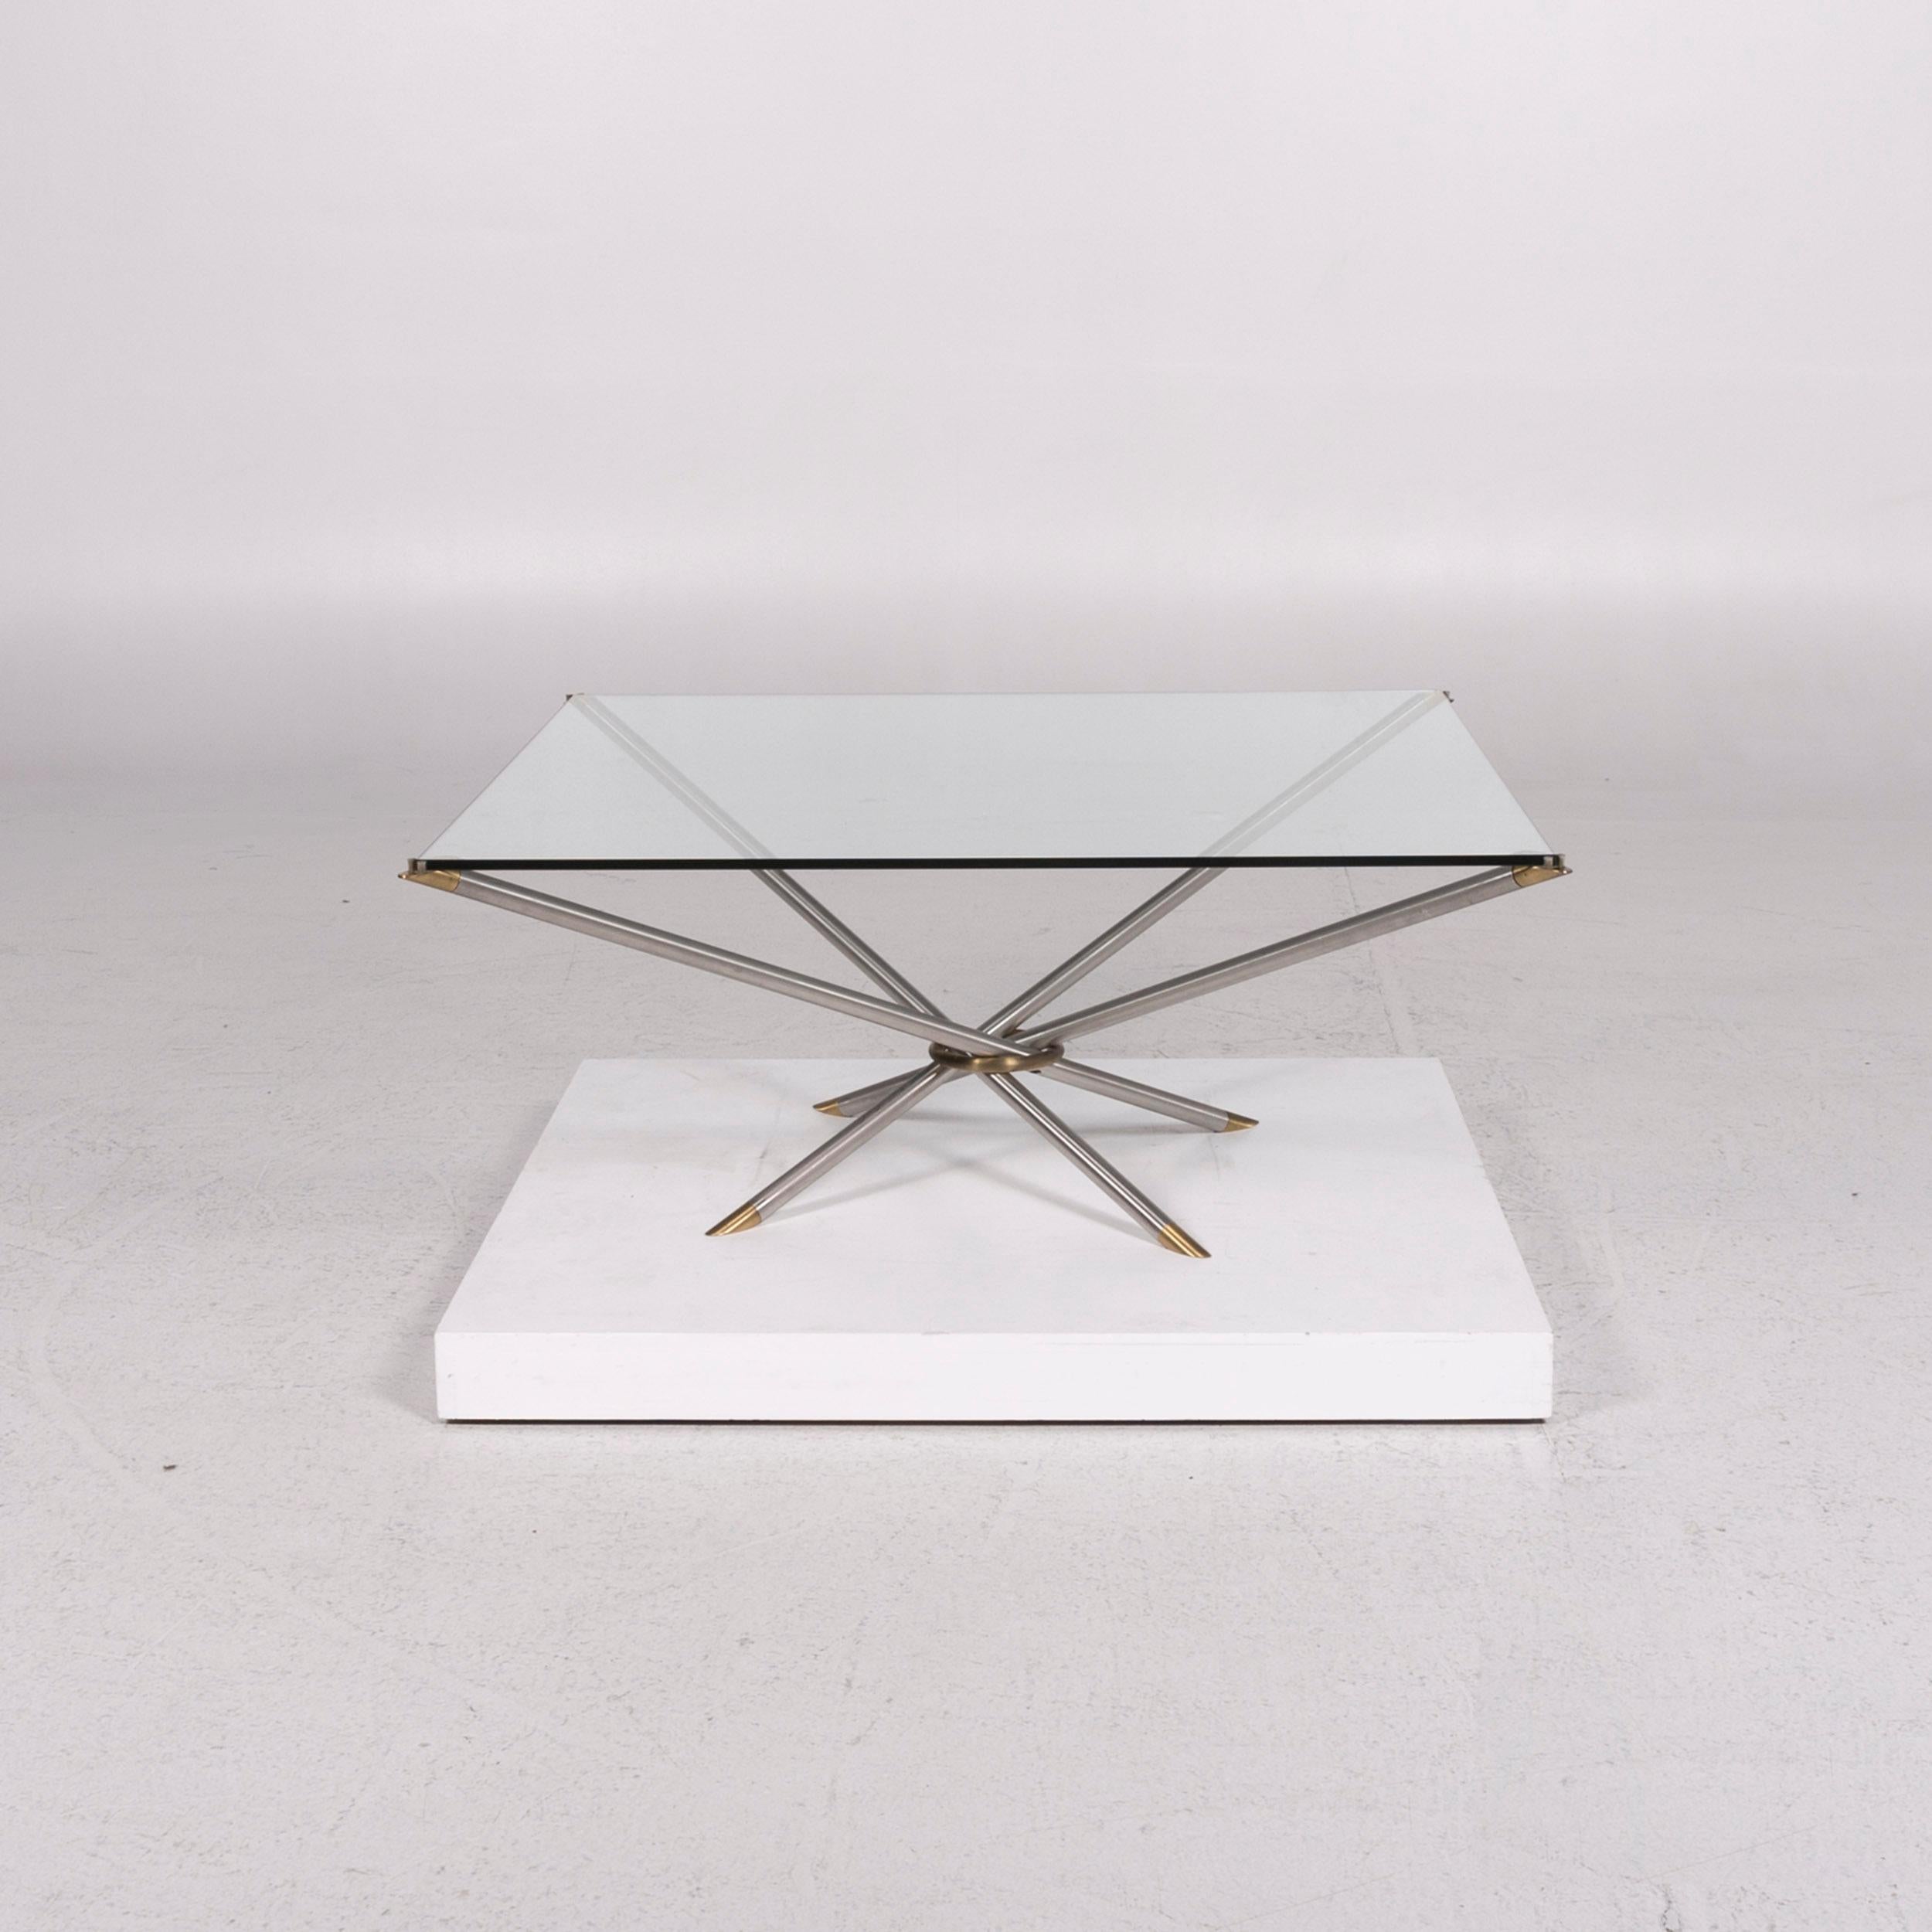 We bring to you a Draenert glass coffee table aluminum brass table square.


 Product measurements in centimeters:
 

Depth 100
Width 100
Height 42.





 